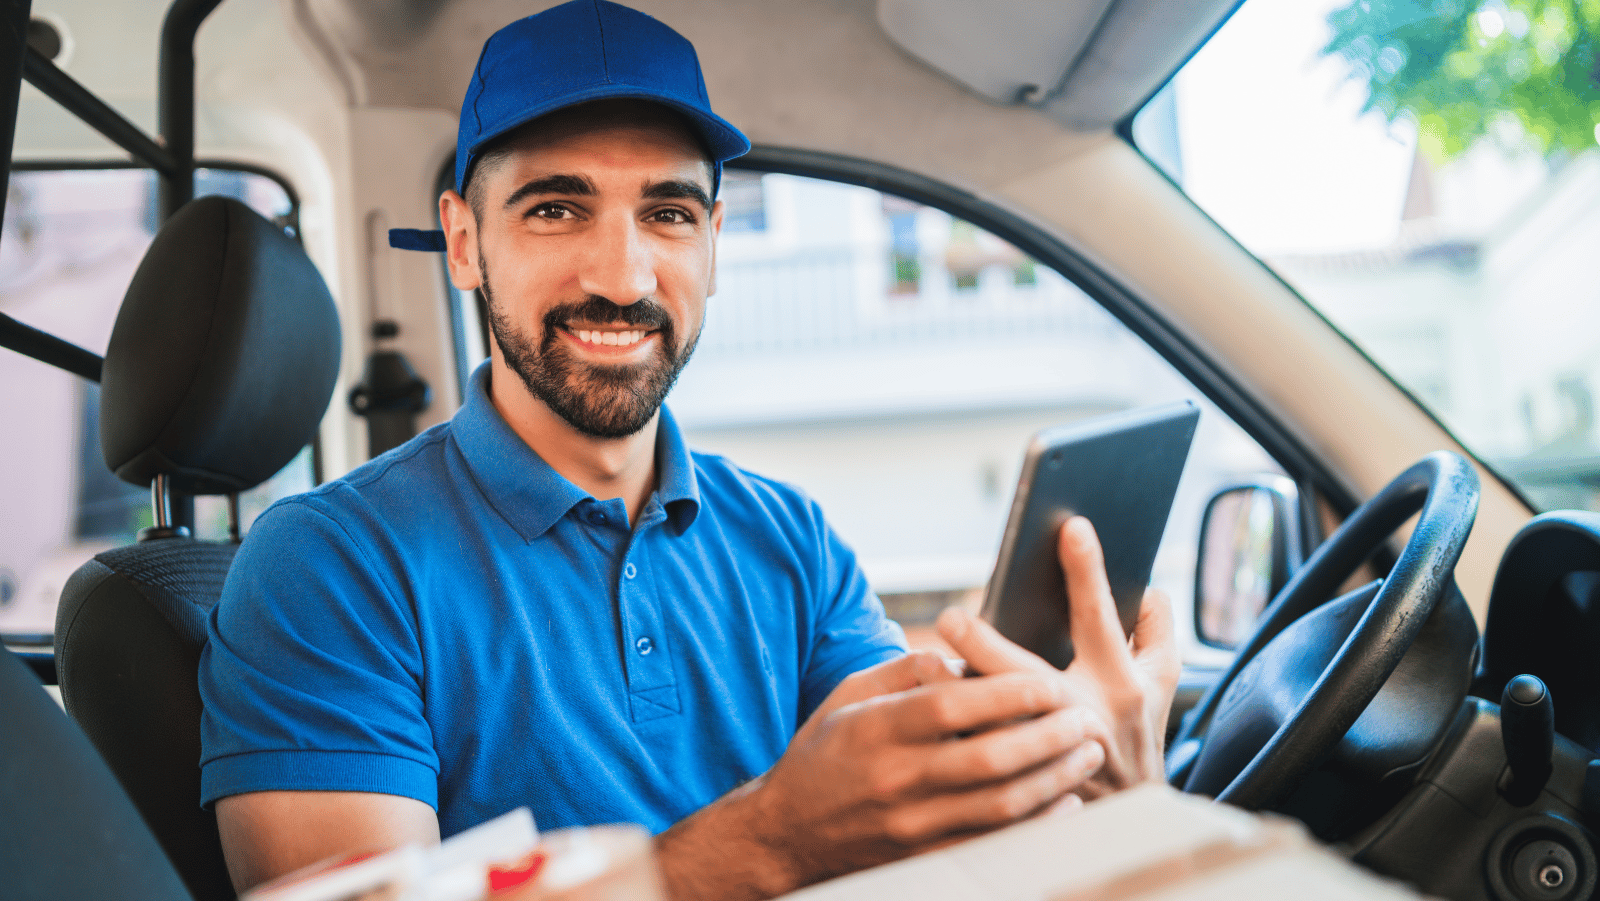 Doordash Requirements for Drivers - A Complete Guide to Becoming Doordash Drivers